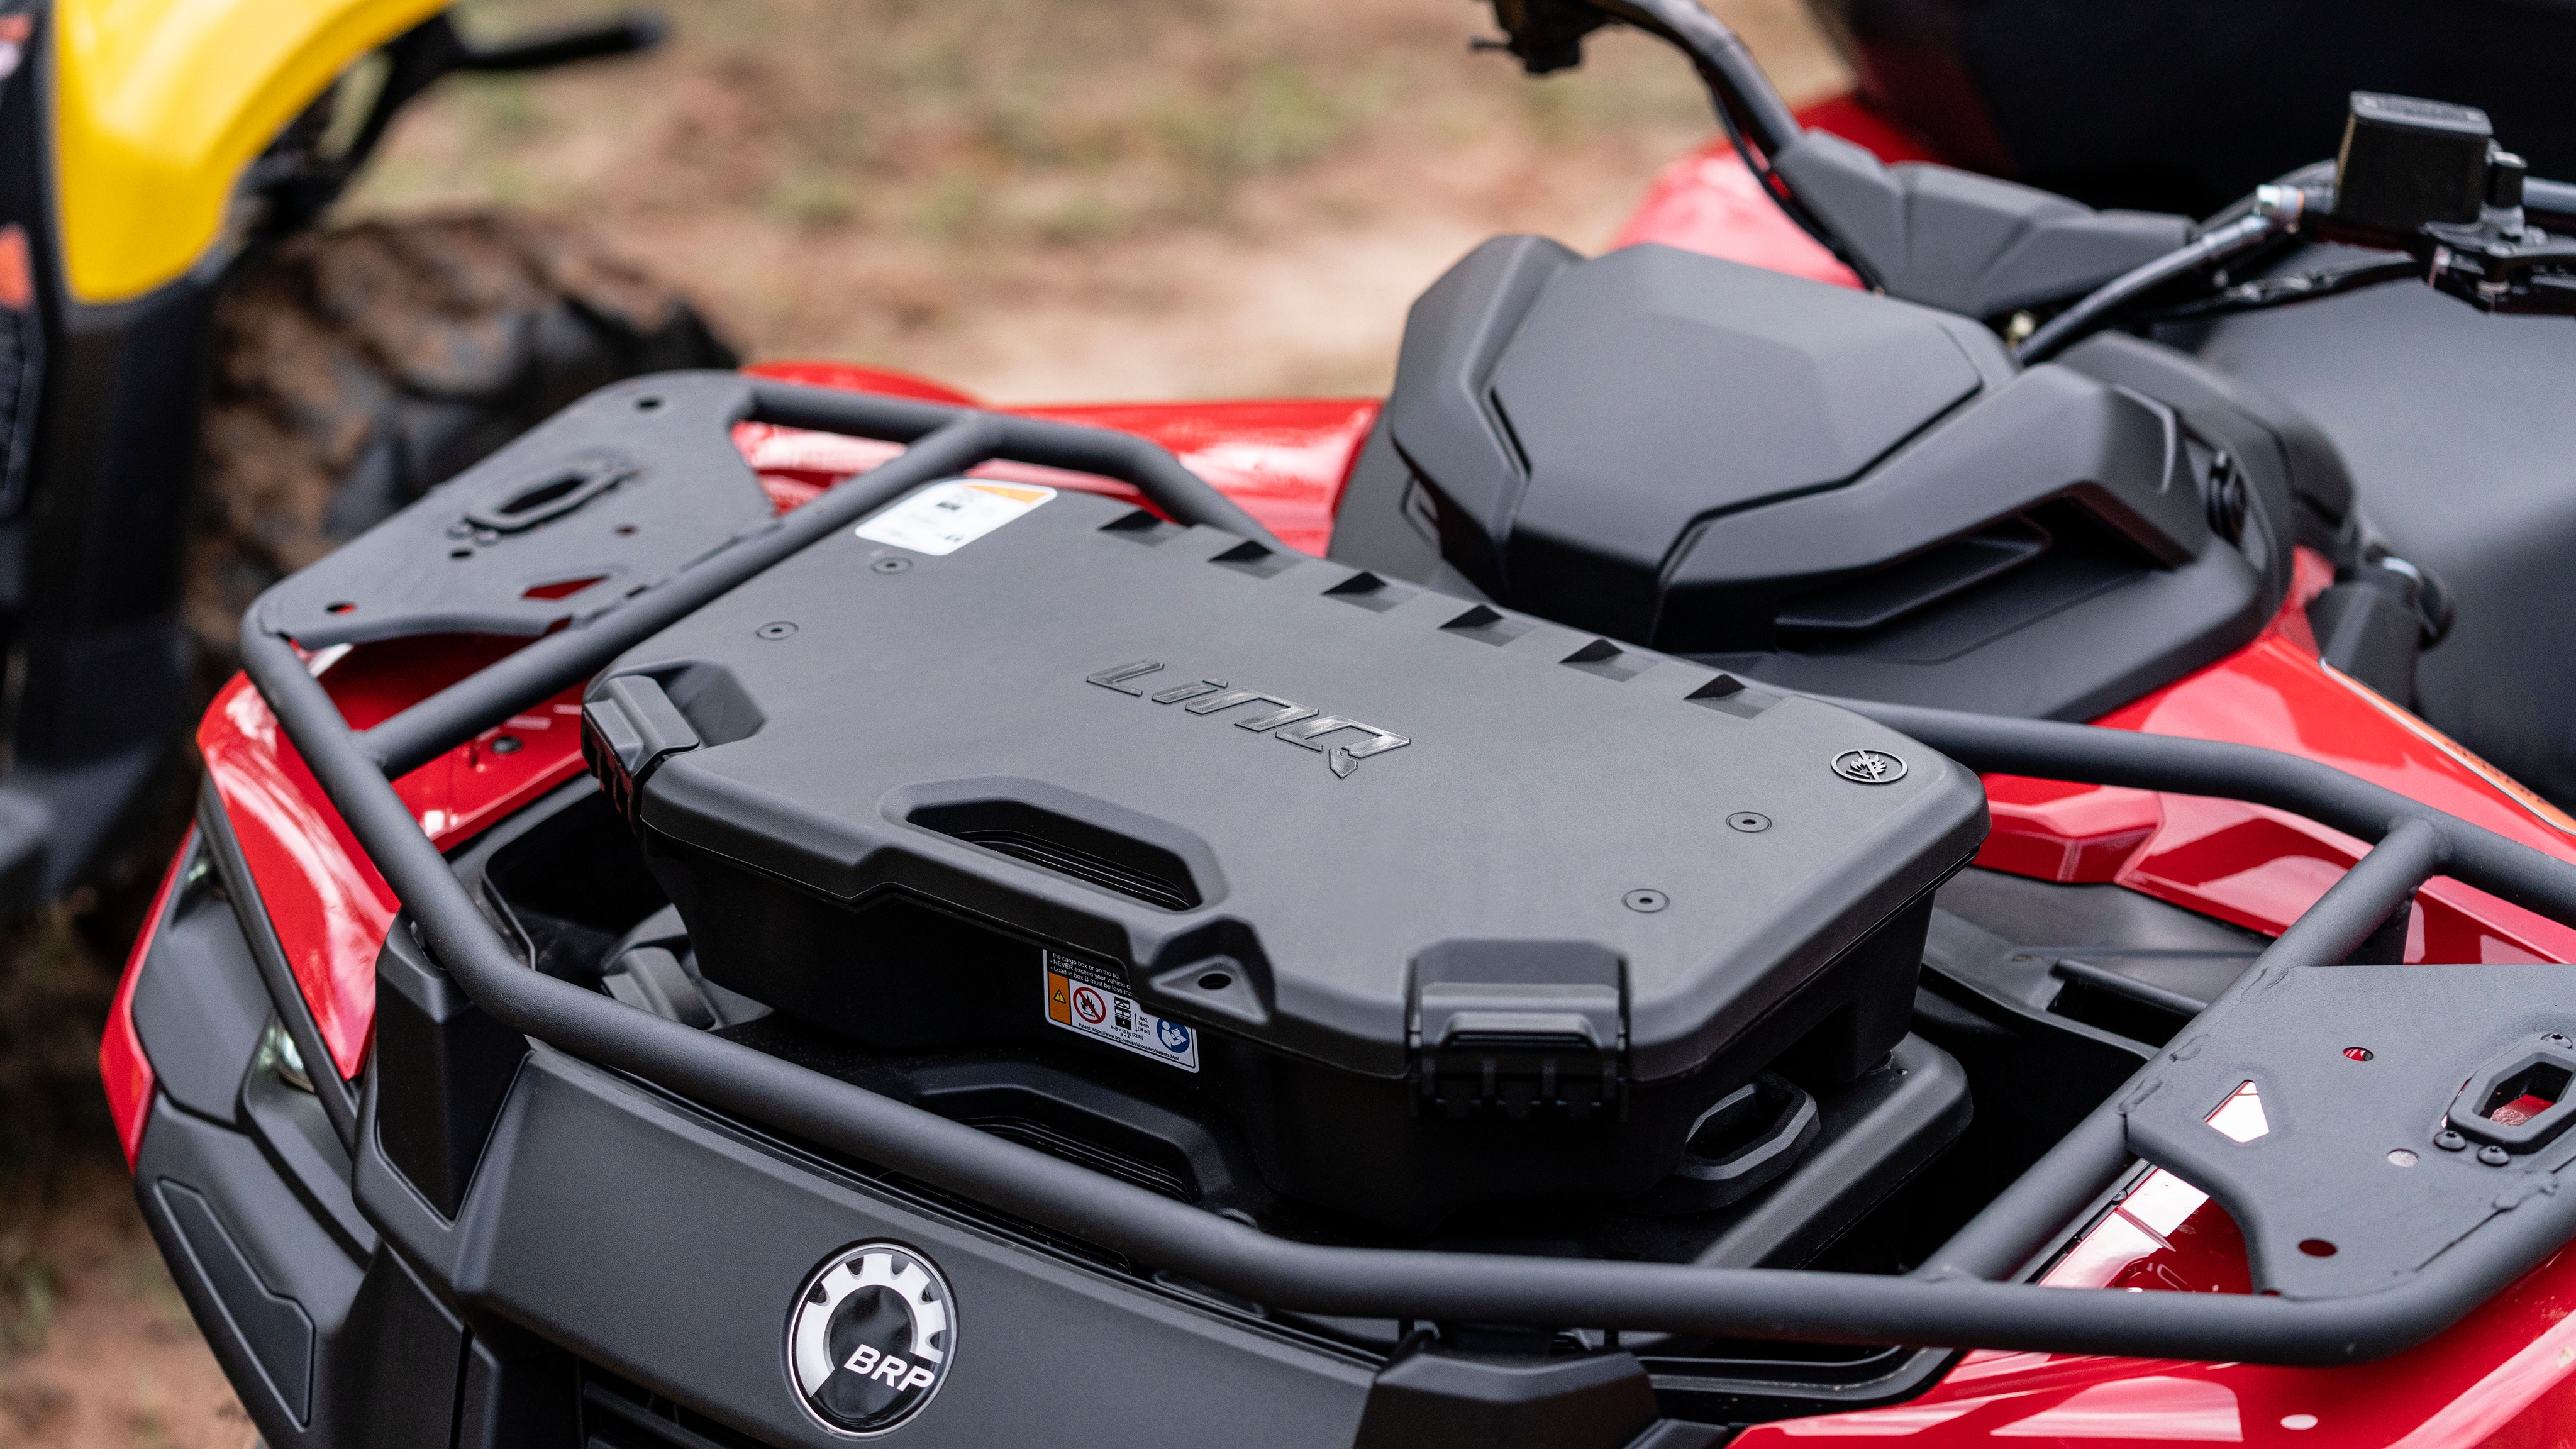 The water-resistant front storage on the 2023 Can-Am Outlander DPS 500